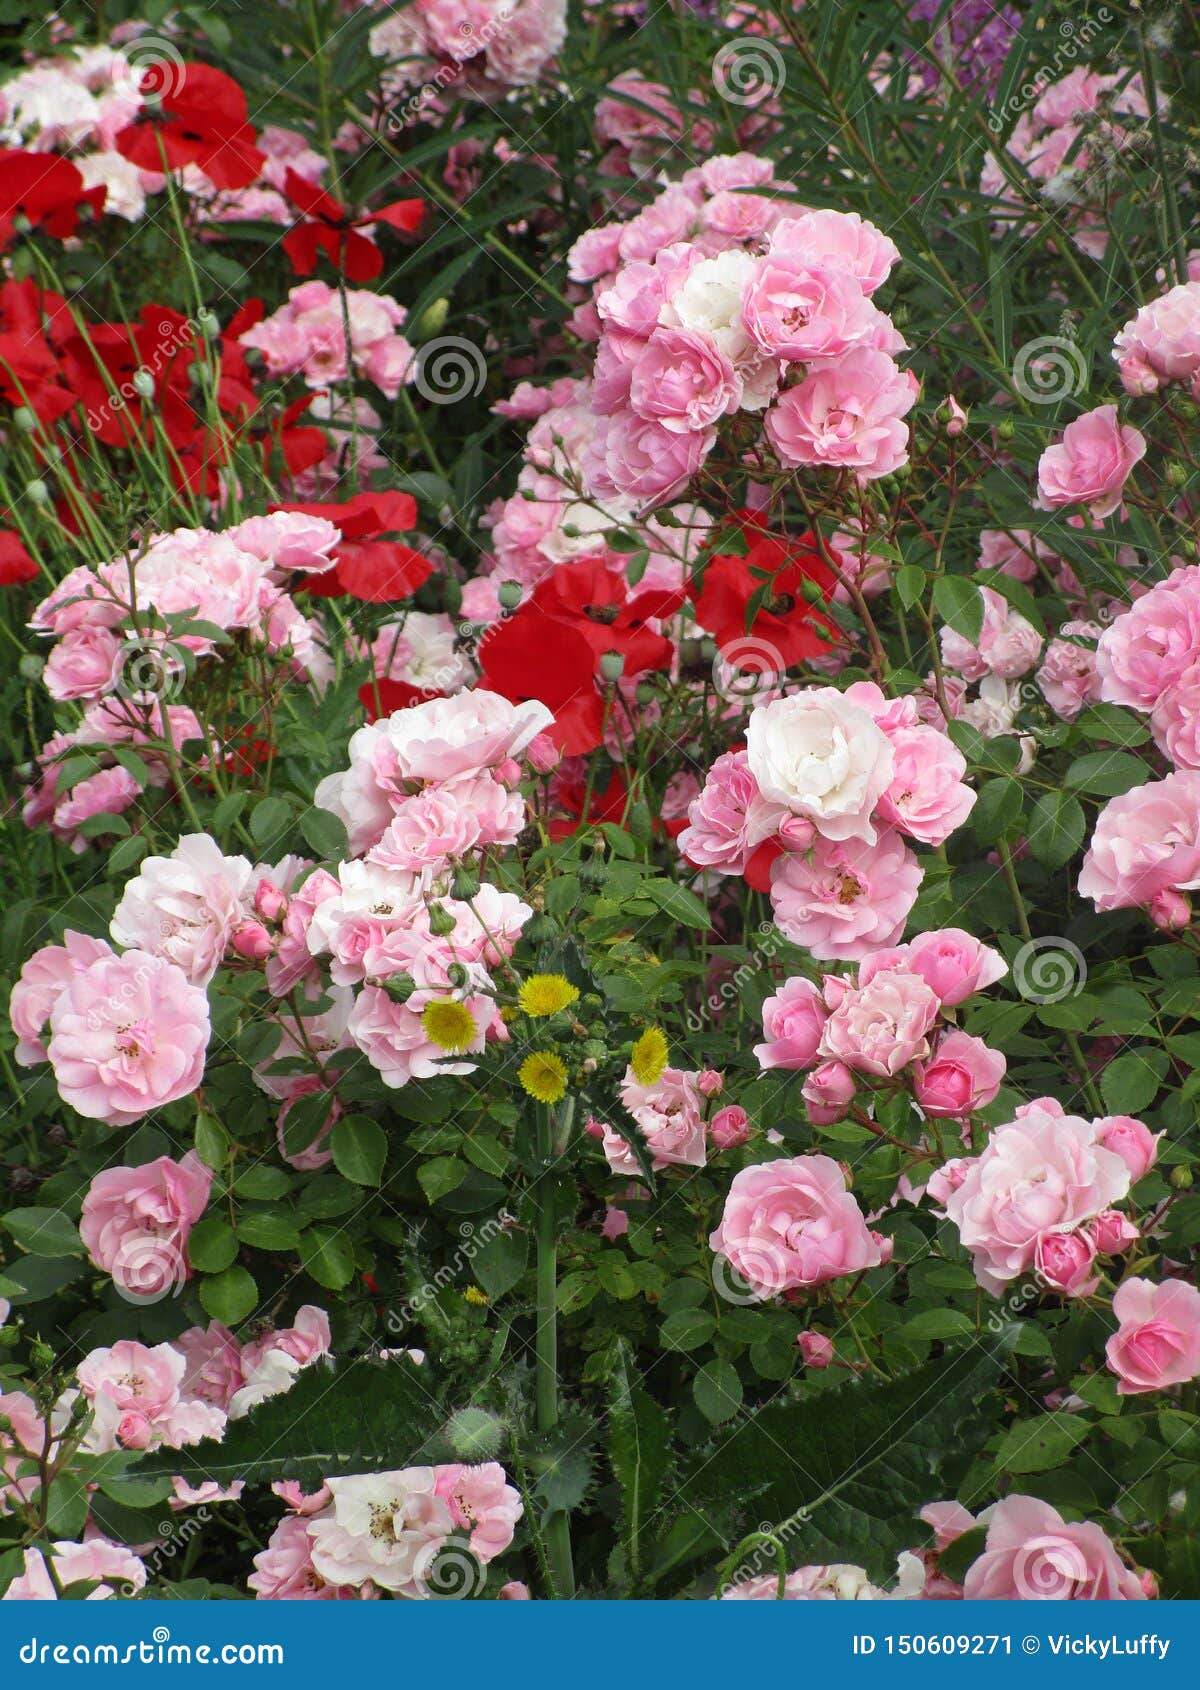 Bright Attractive Royal Bonica Dainty Pink Roses Blooming in Summer ...